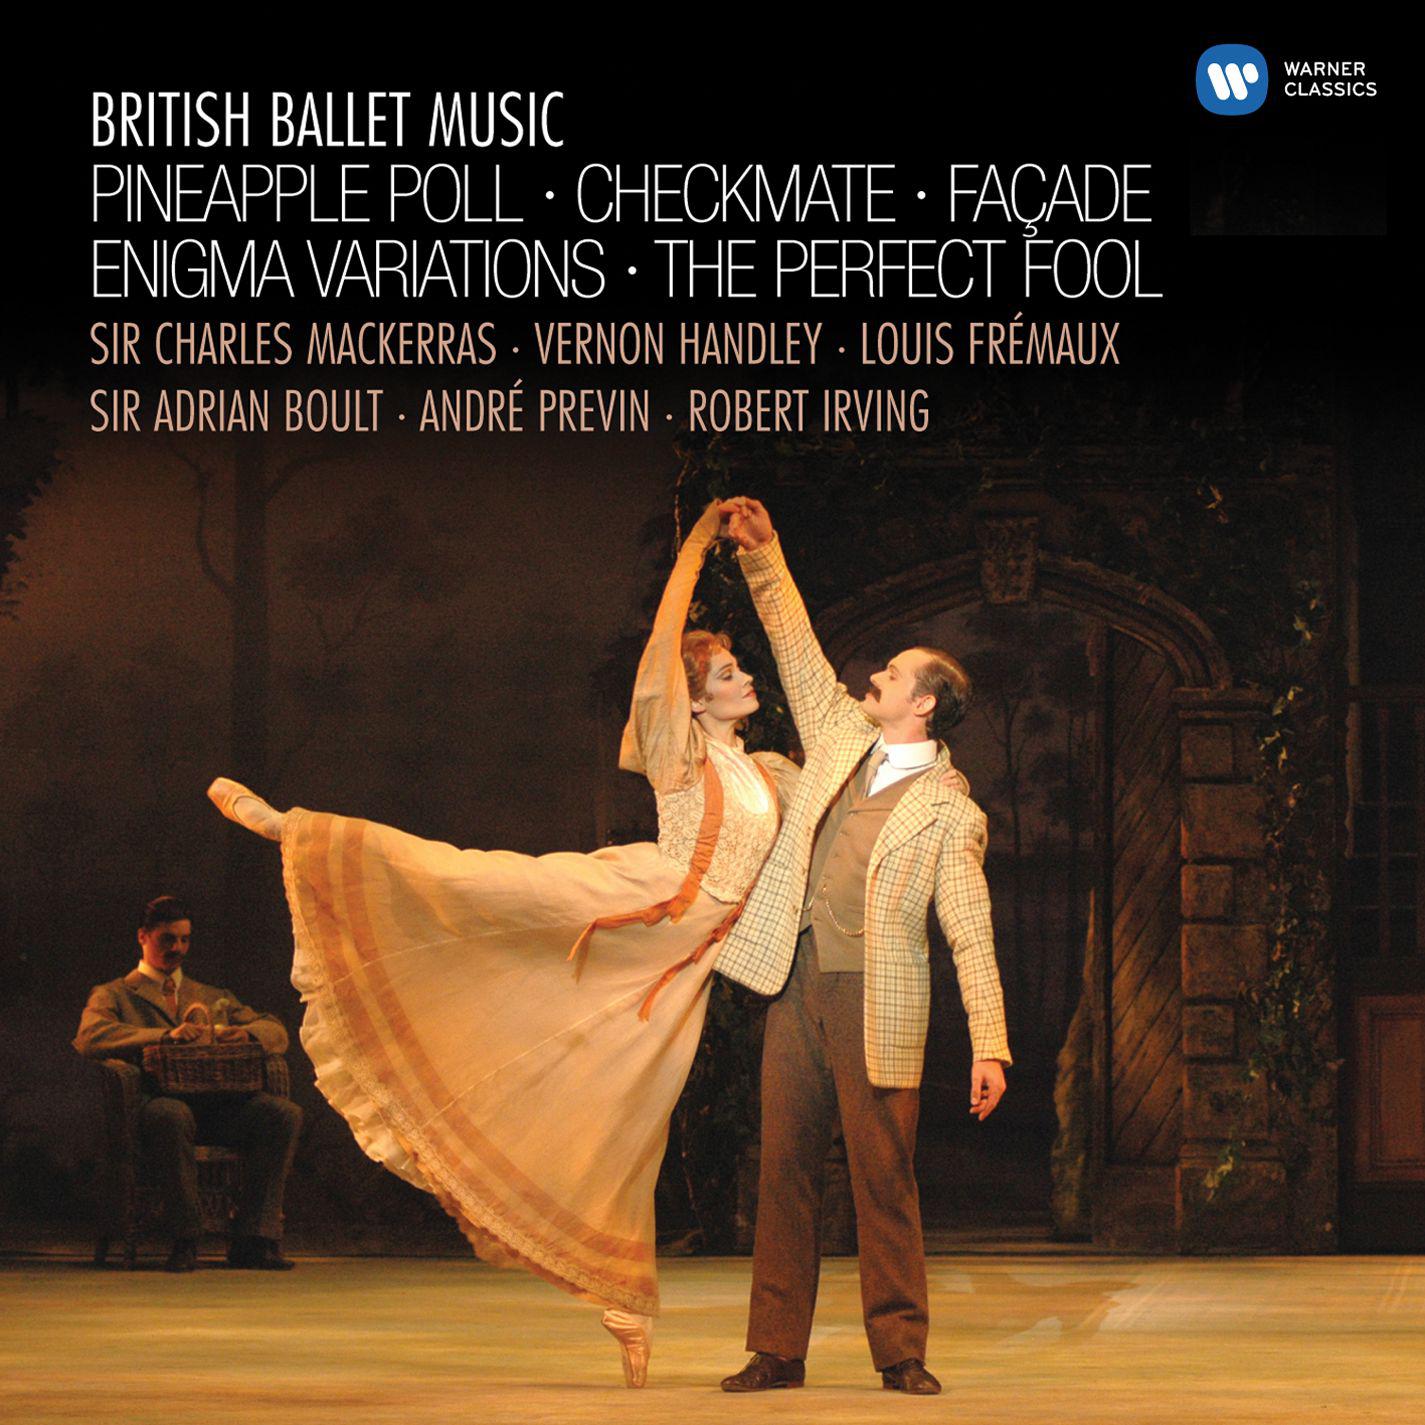 The Perfect Fool, Op. 39, Ballet Music:II. Dance of Spirits of Earth. Moderato - Andante